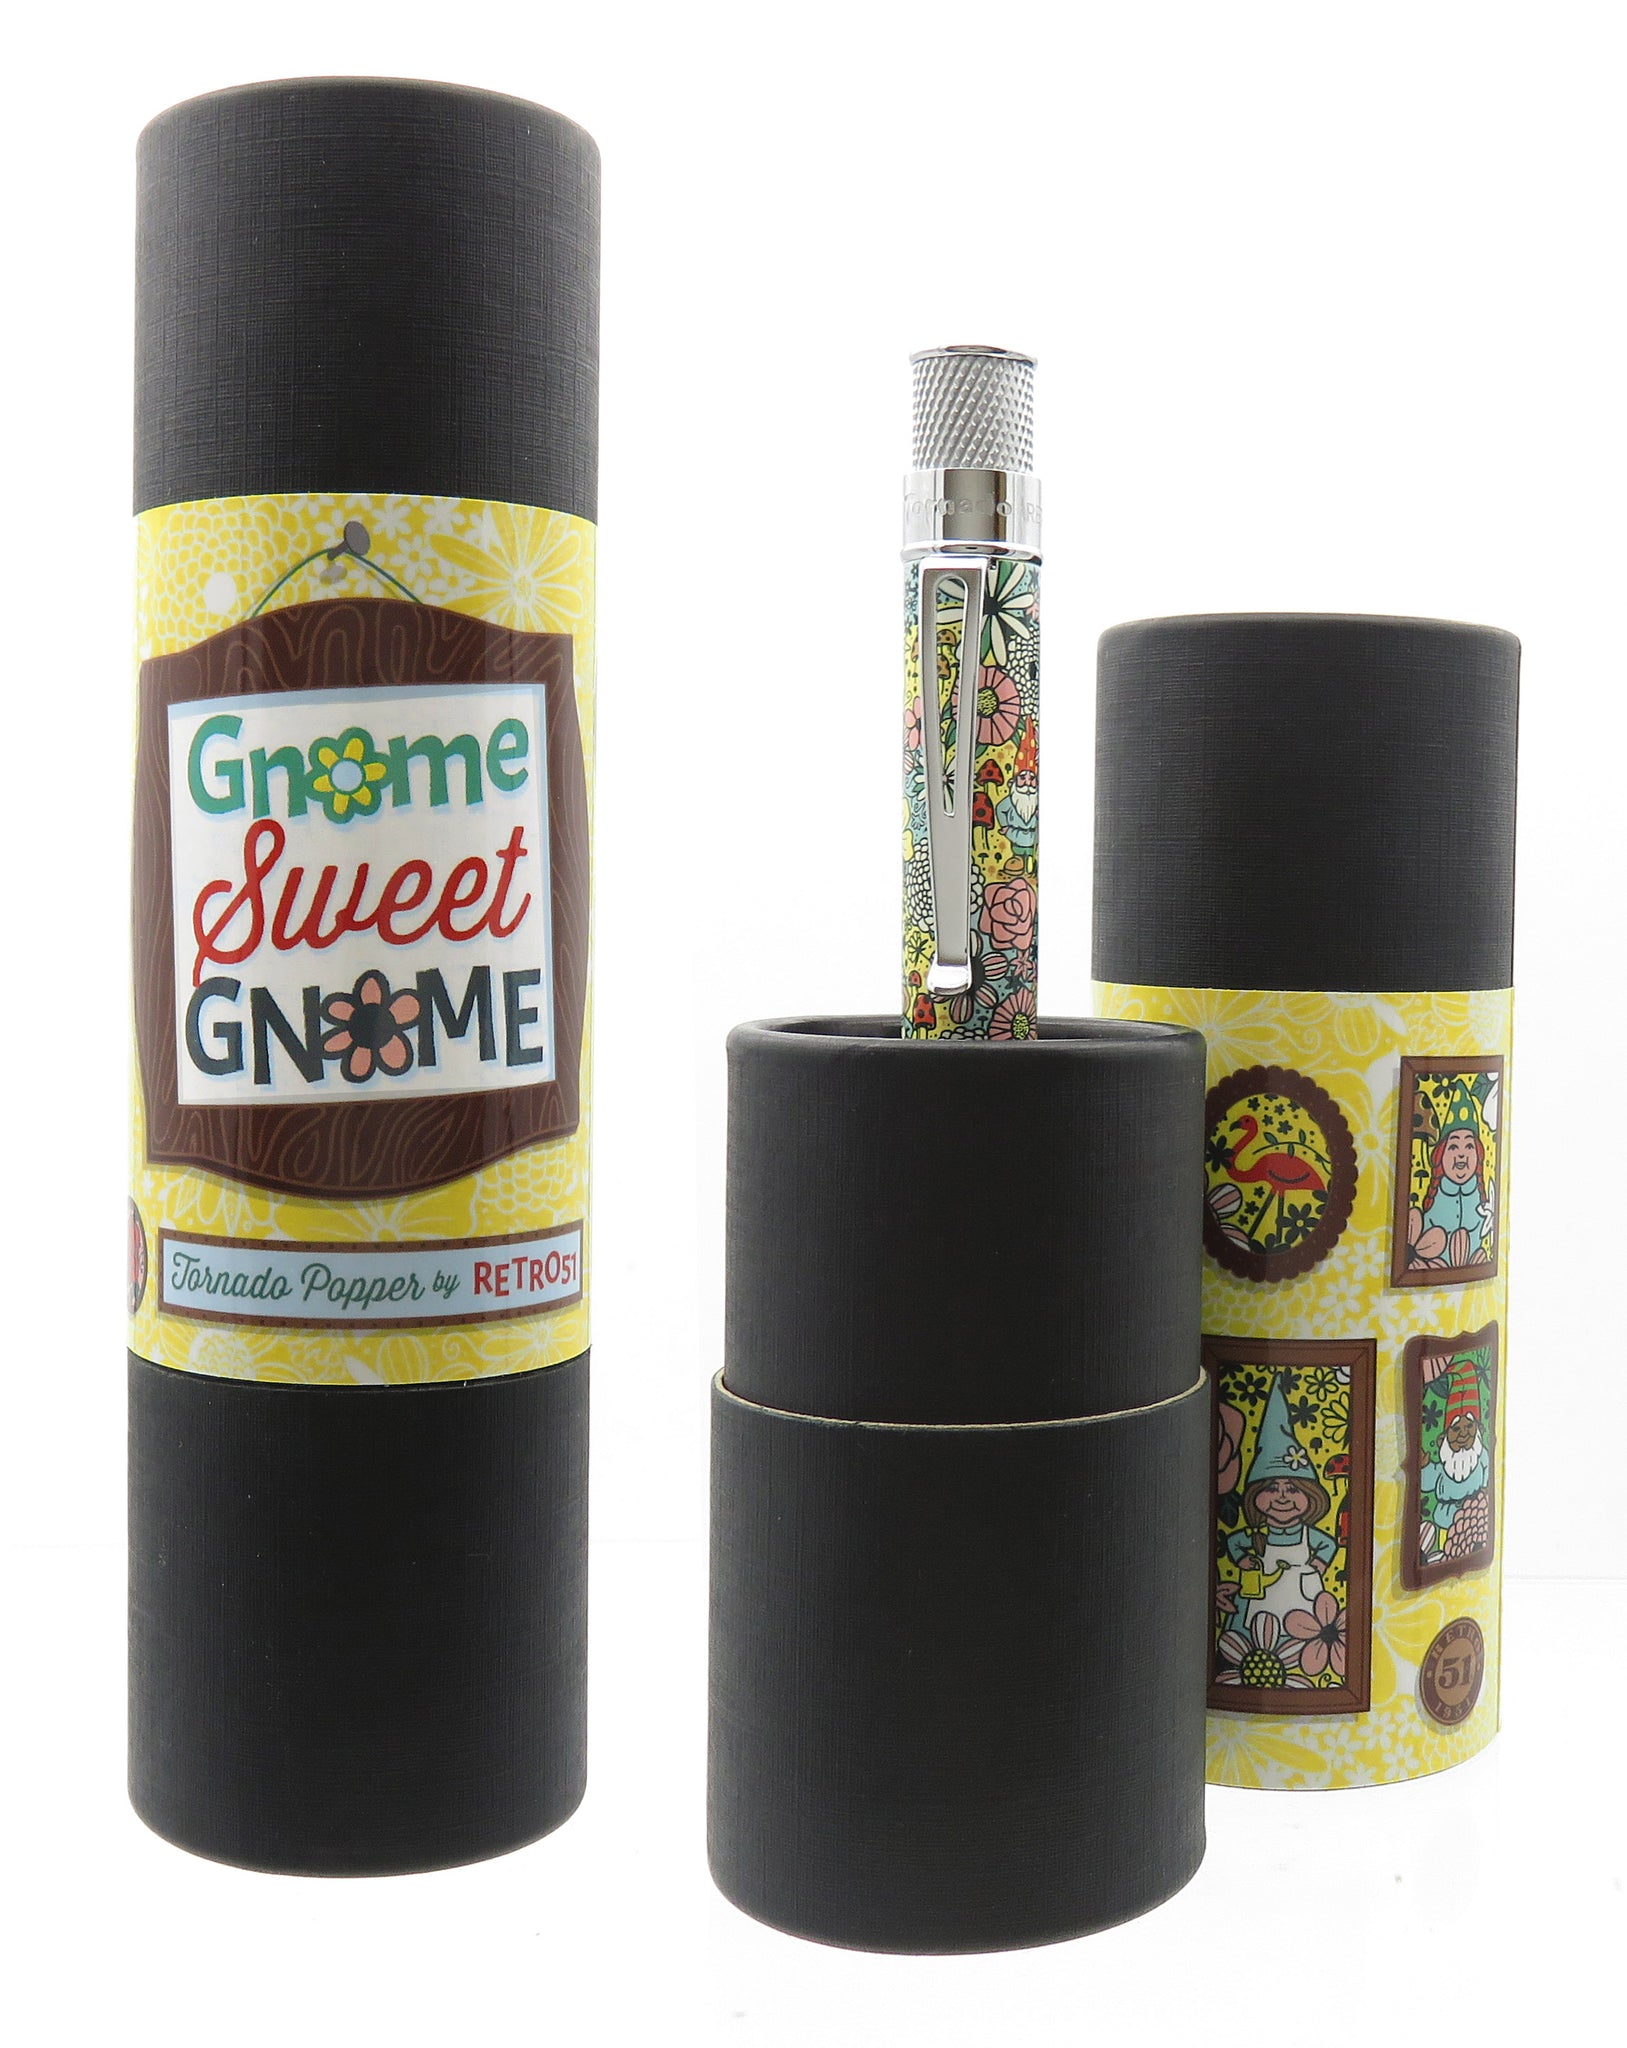 Gnome Sweet Gnome Limited Edition Popper June 8th 2021